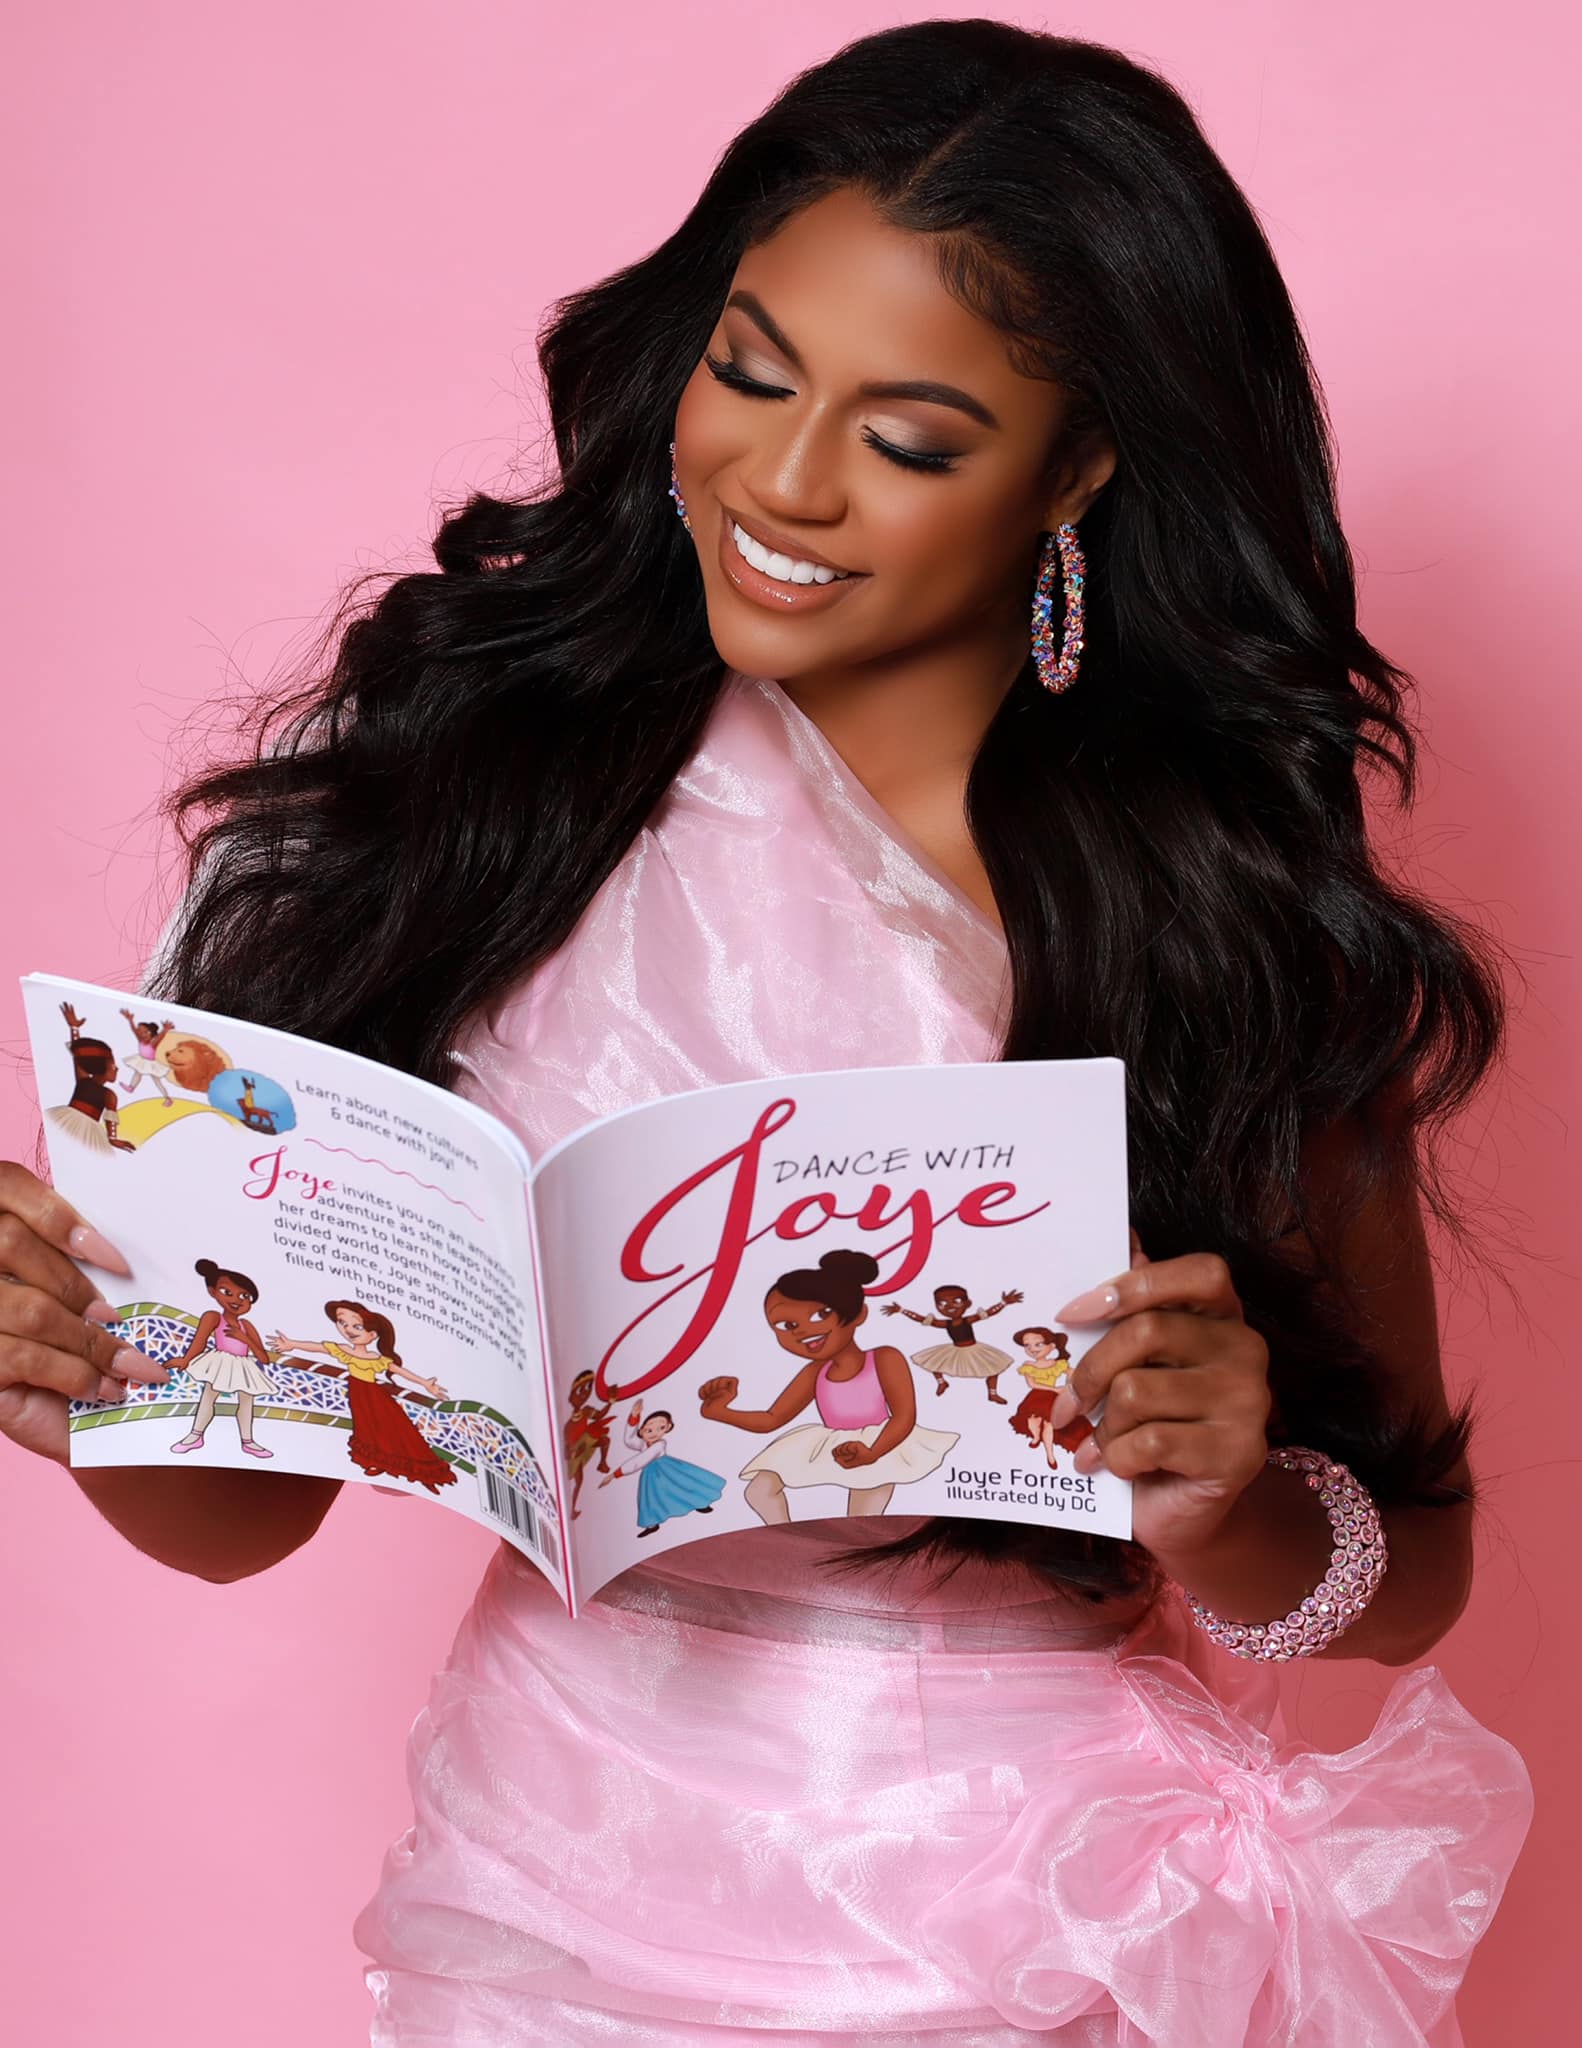 Joye Forrest, Miss Missouri USA, Is Available for Speaking Engagements, Brand Endorsements, and Events 